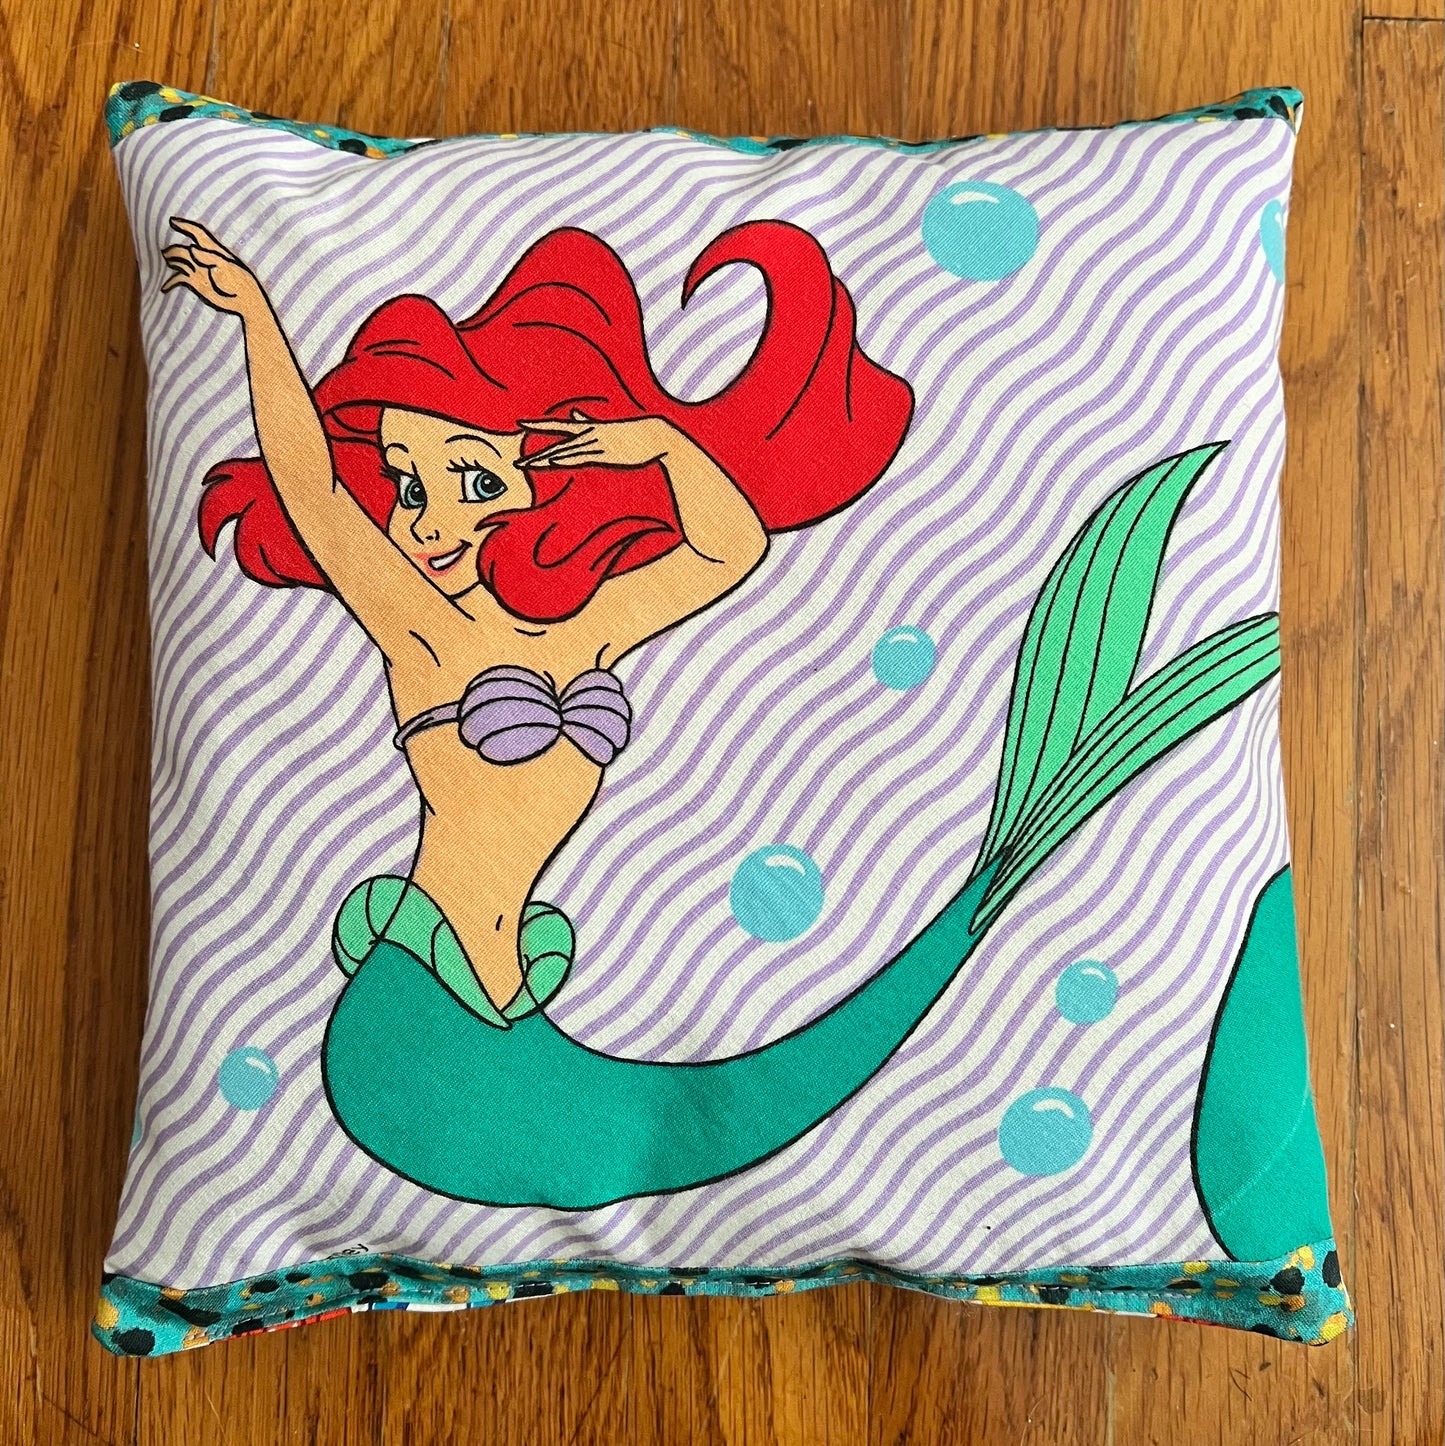 A little accent pillow, with Ariel from The Little Mermaid, original art from a vintage sheet